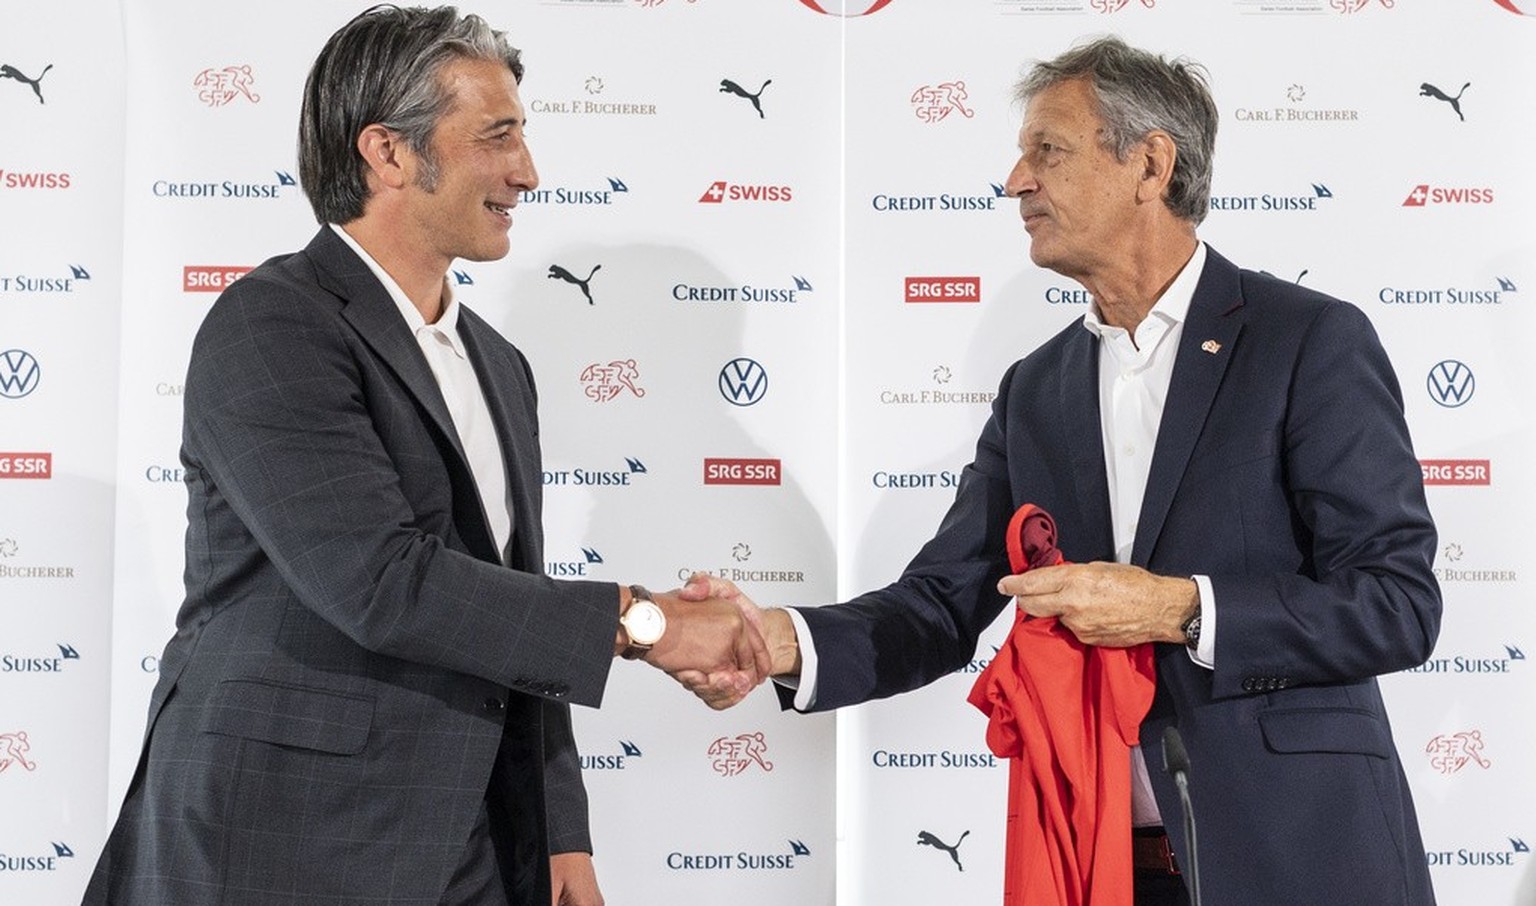 Swiss soccer coach Murat Yakin, left, shakes hands wth Dominique Blanc, president of the Swiss football federation SFV, at a press conference where he is presented as the new coach of the team in Muri ...